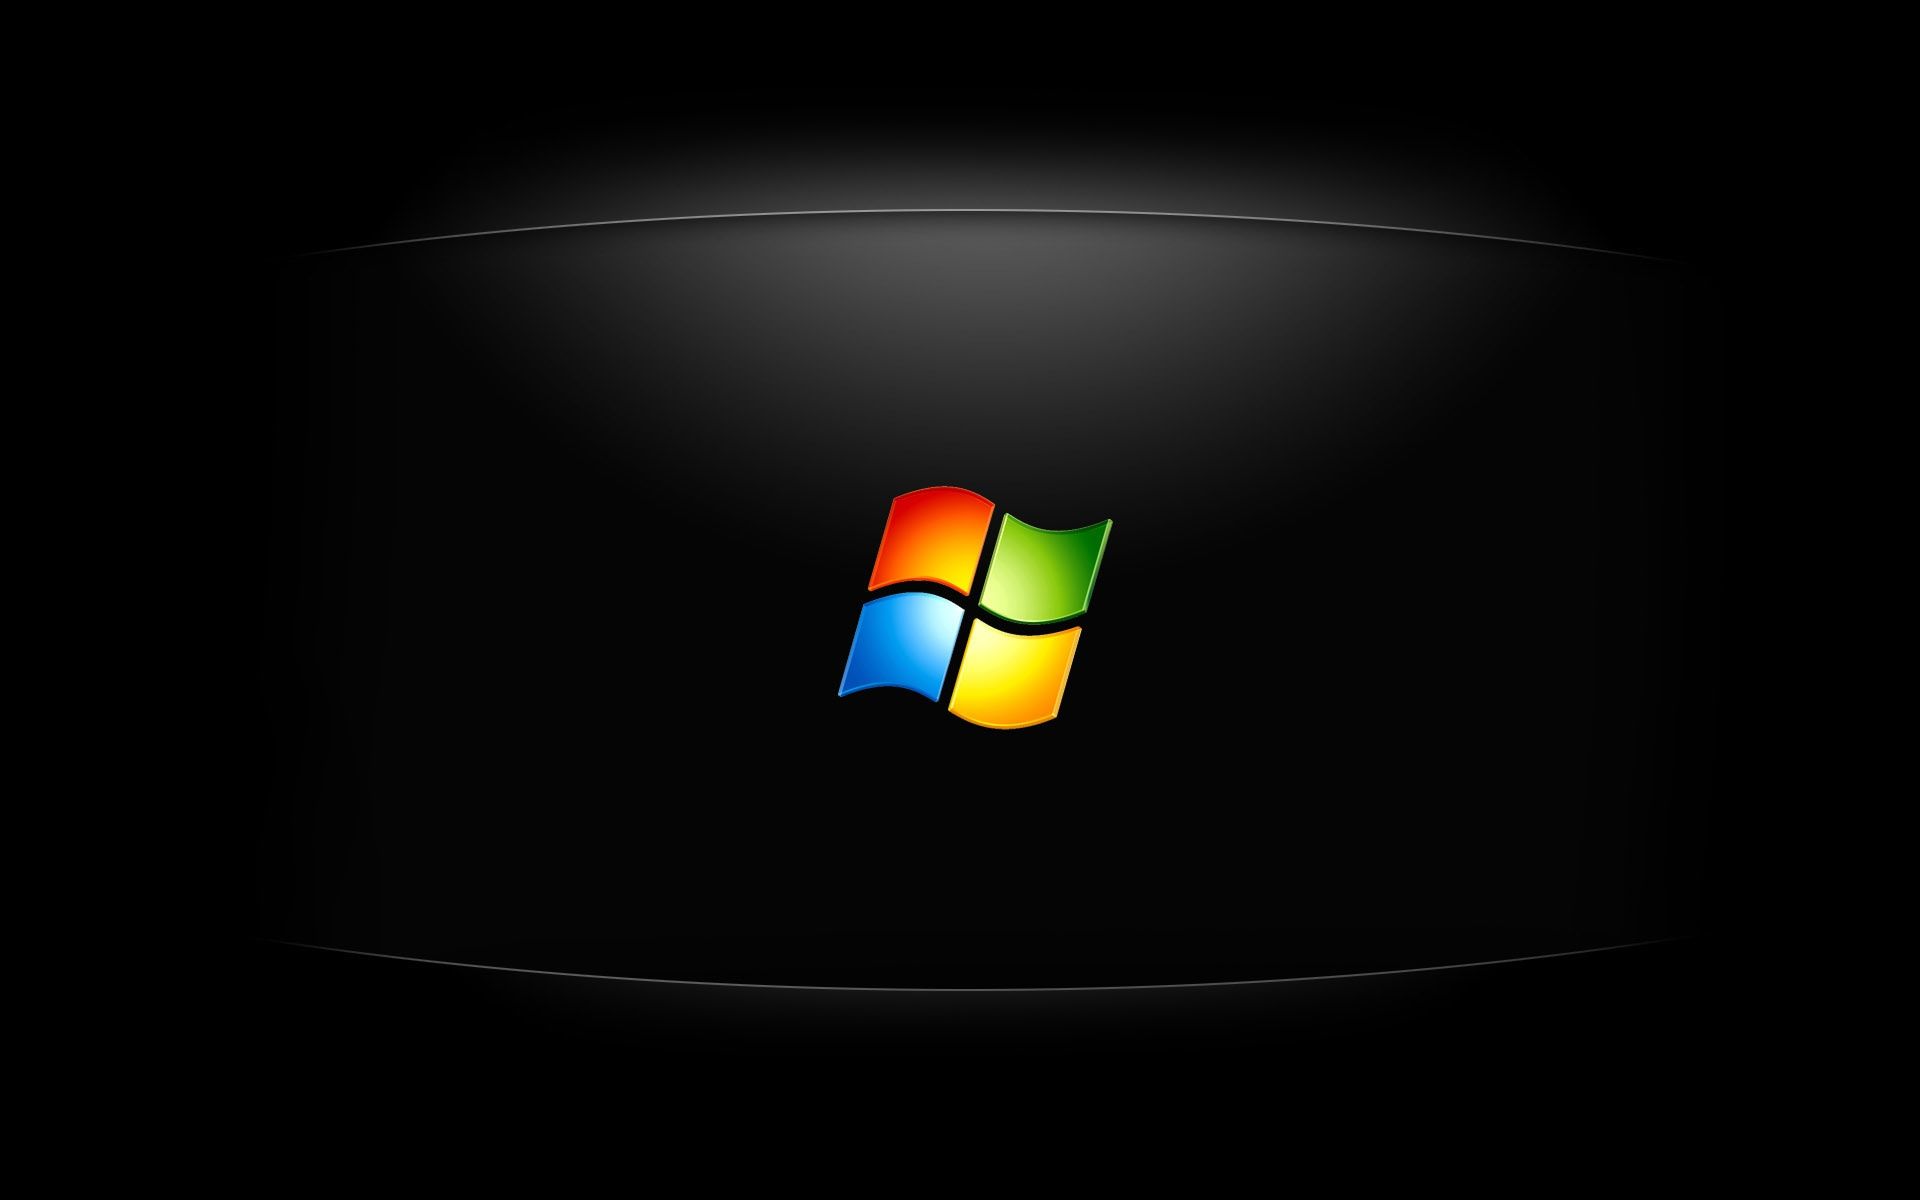 Windows Logo On Black Background Wallpaper For Phones And Tablets